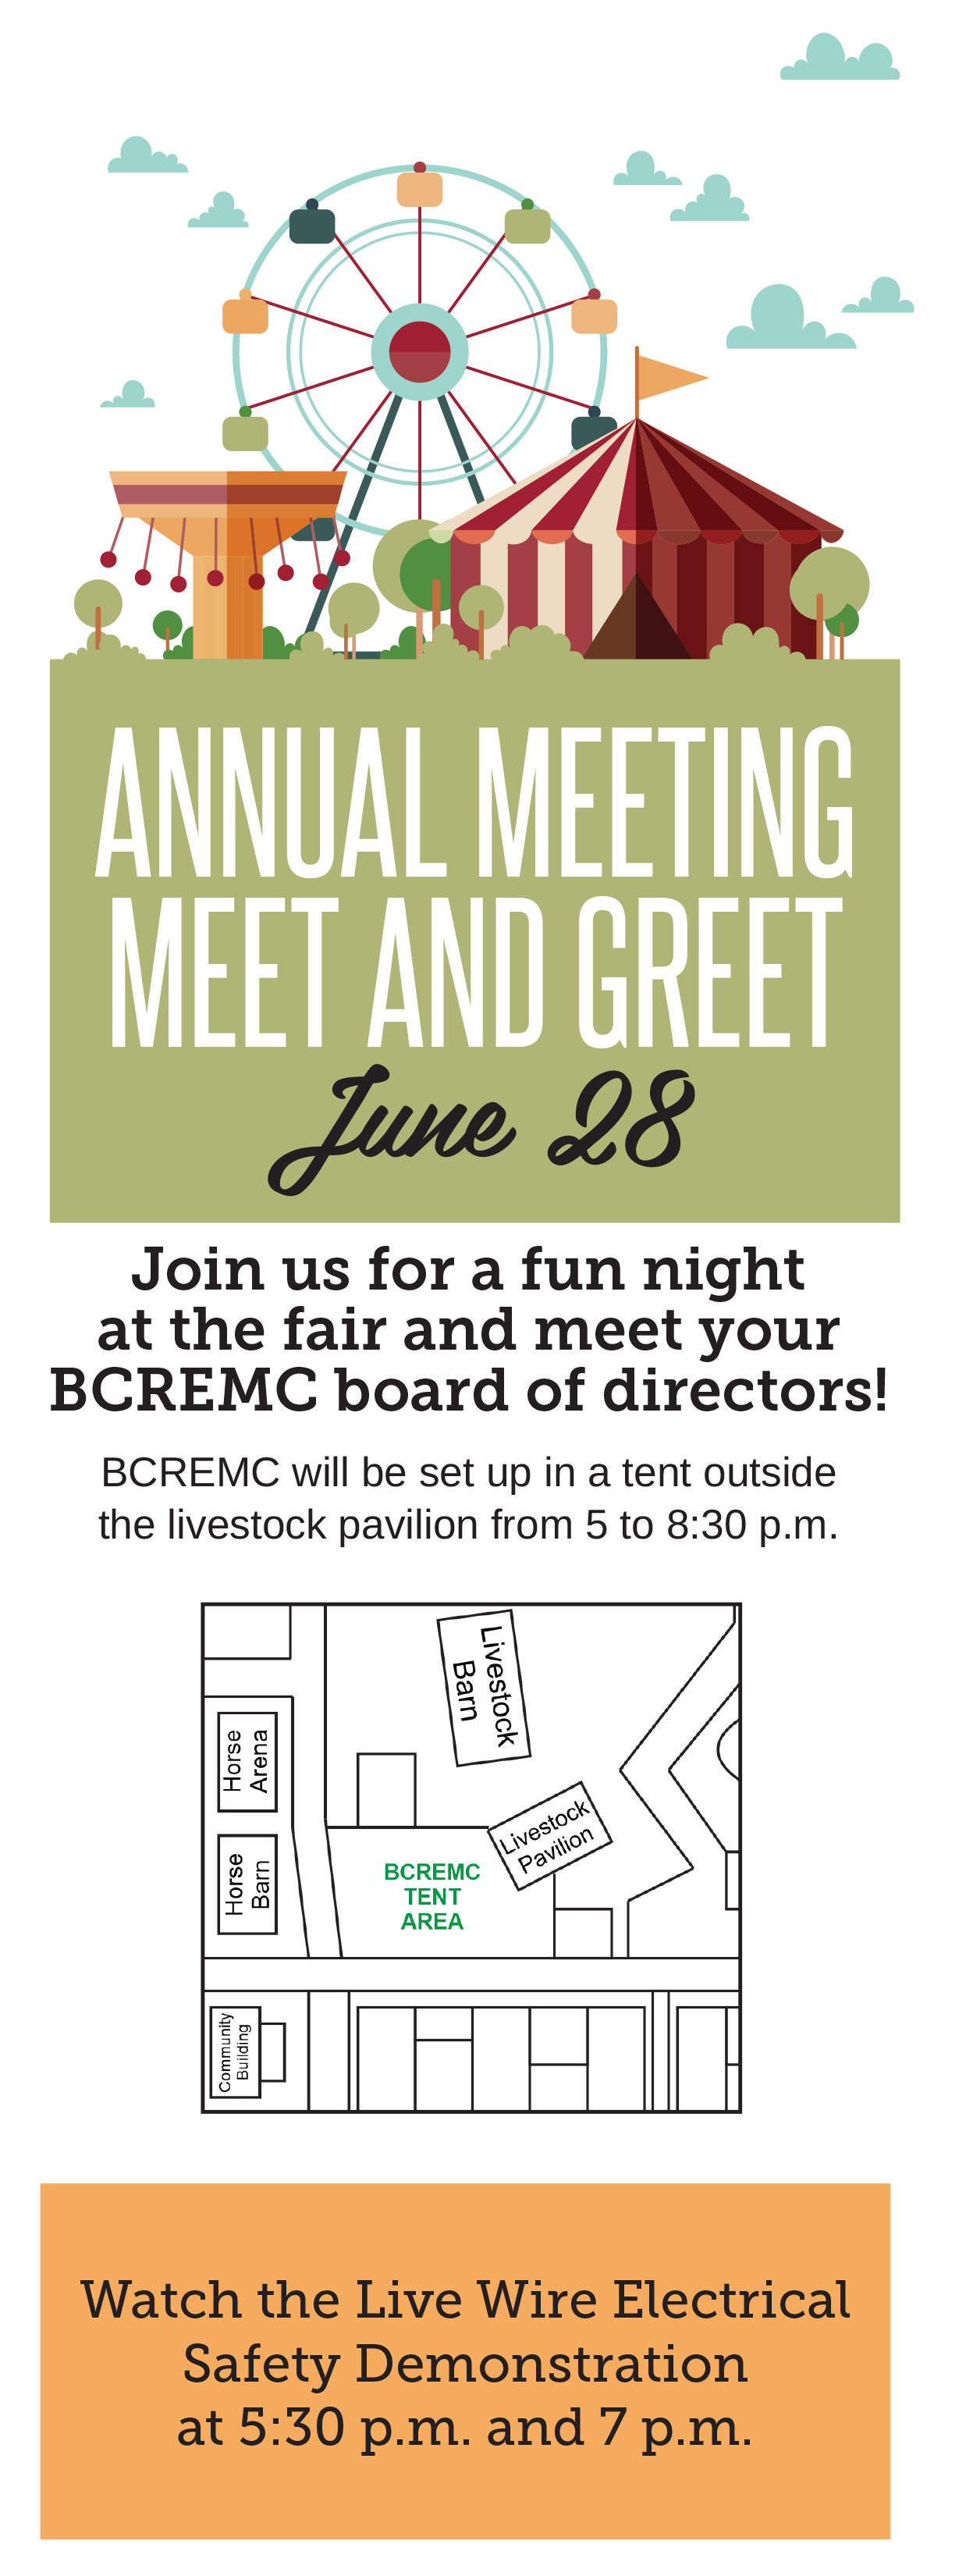 Annual Meeting Ad